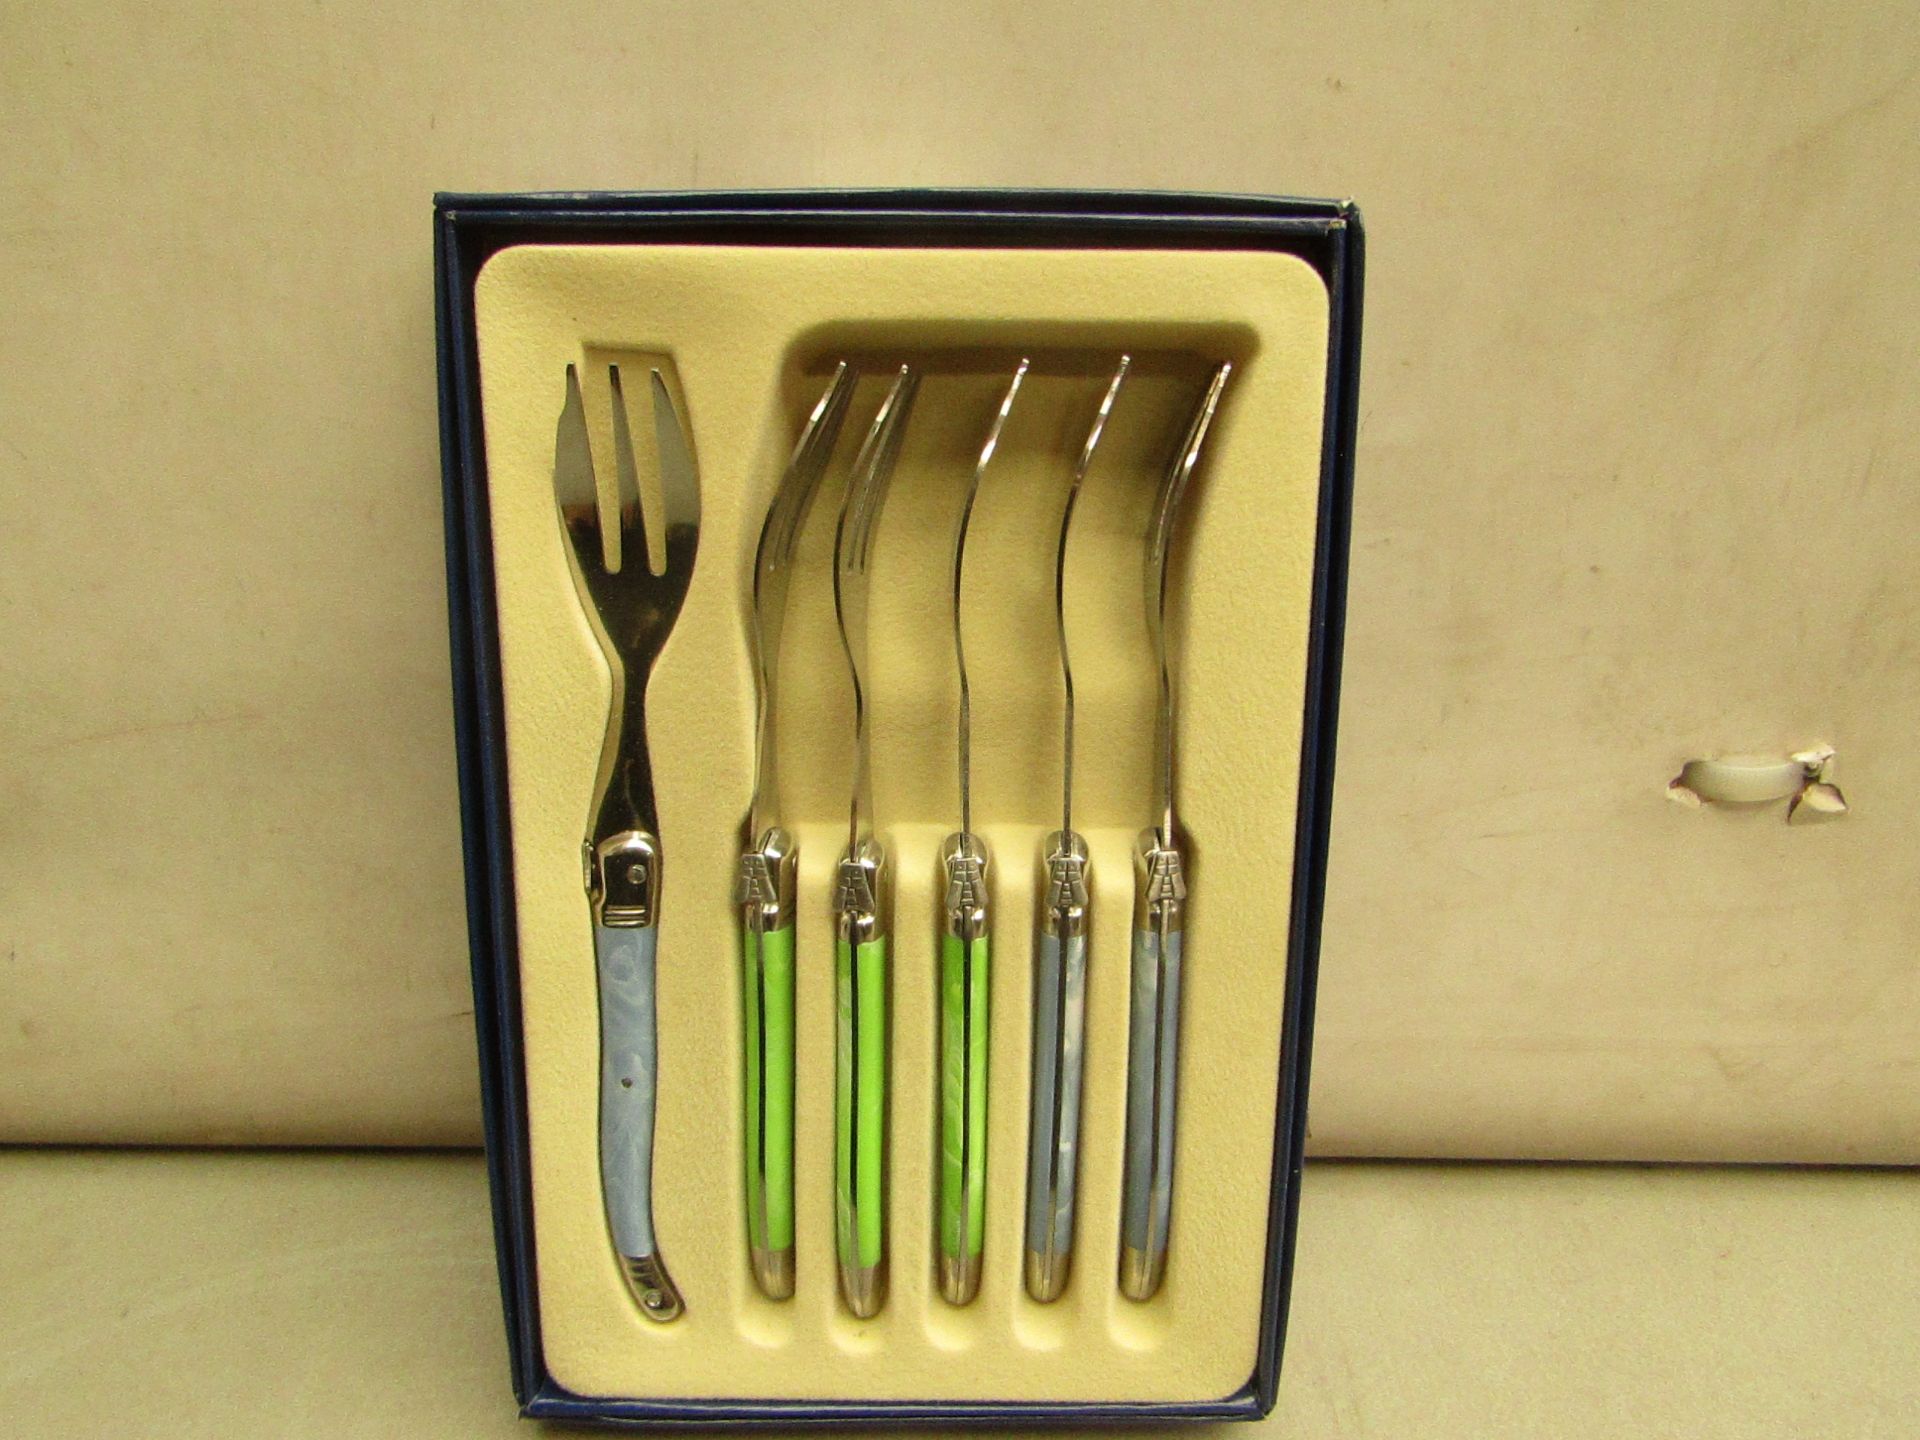 5x Laguiole - Cake Forks (6 Forks Per Box) Blue & Green - Unused & Boxed.